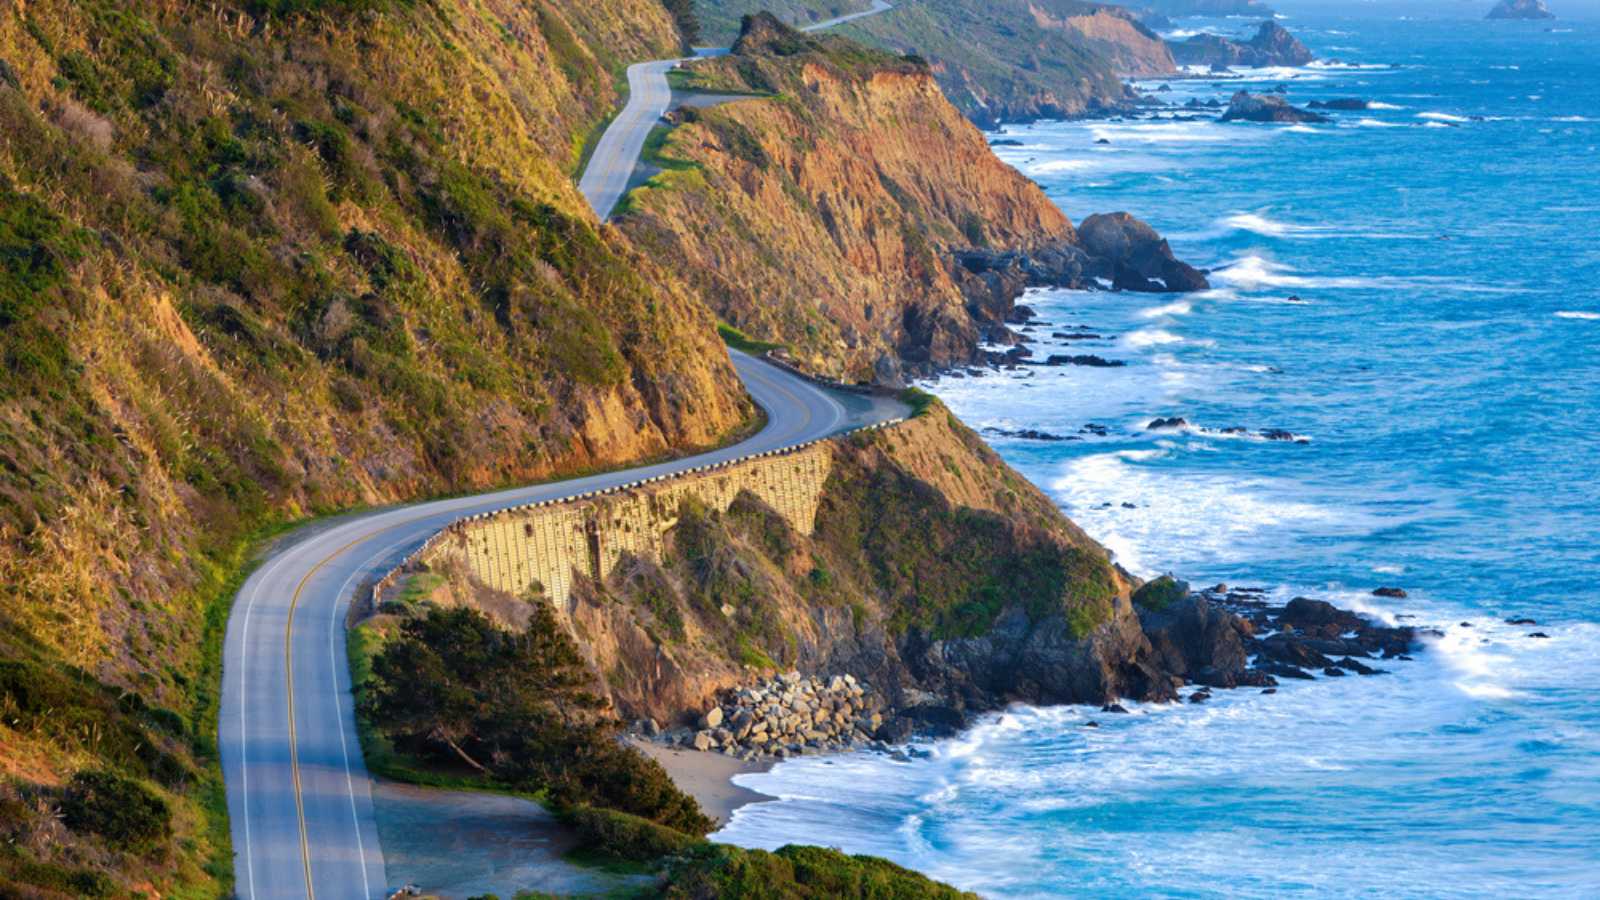 Pacific Coast Highway (Highway 1) at southern end of Big Sur, California